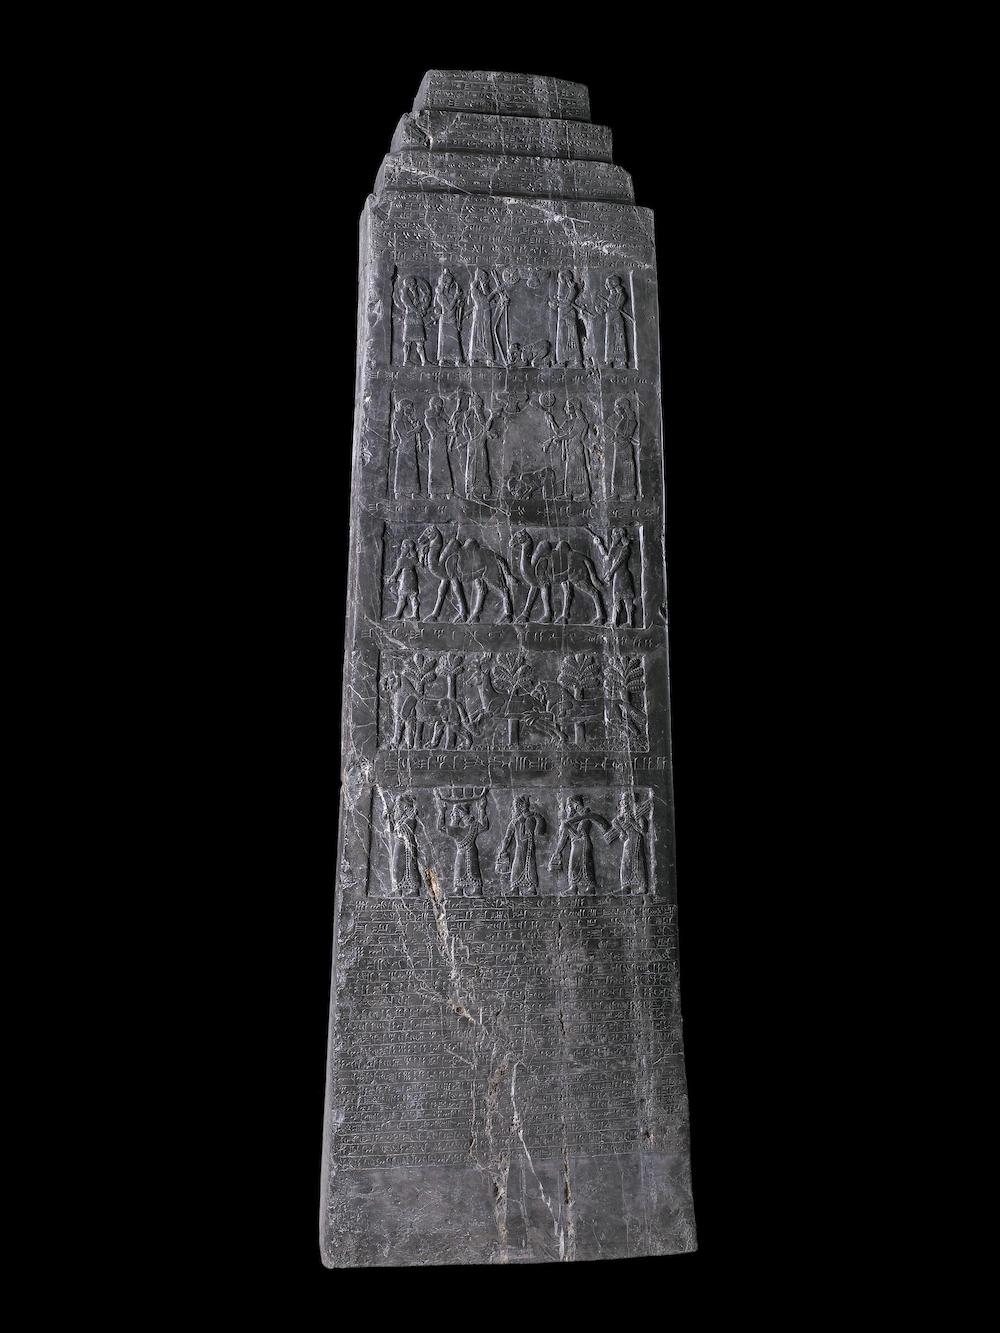 Black limestone obelisk at the British Museum in London. Photo Credit: © The Trustees of the British Museum.